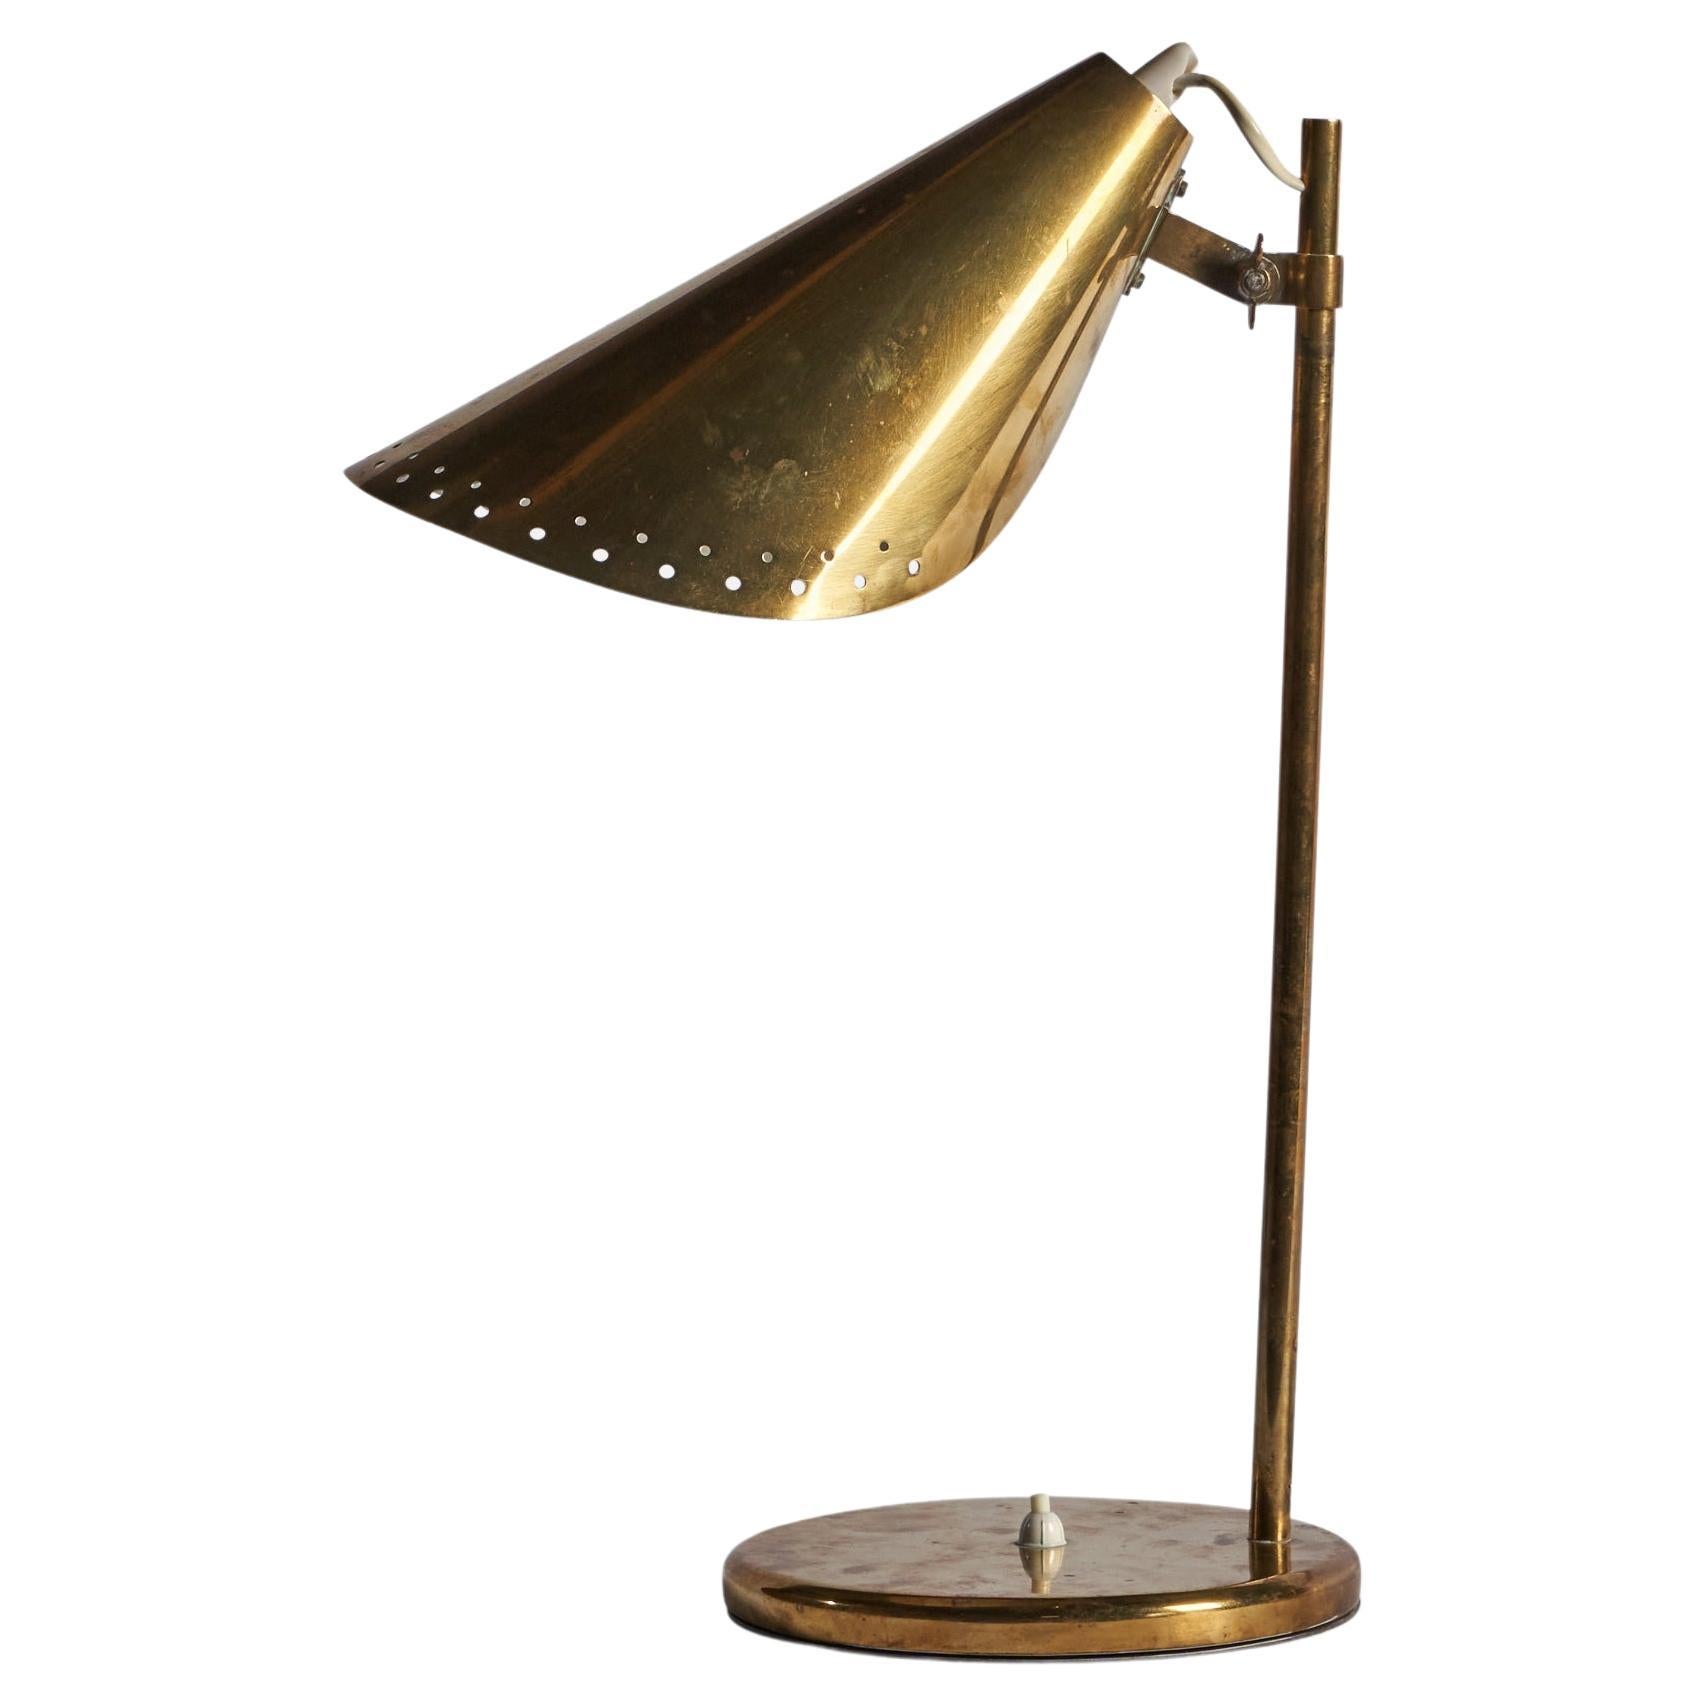 KT Valaisin, Table Lamp, Brass, Finland, 1960s For Sale at 1stDibs